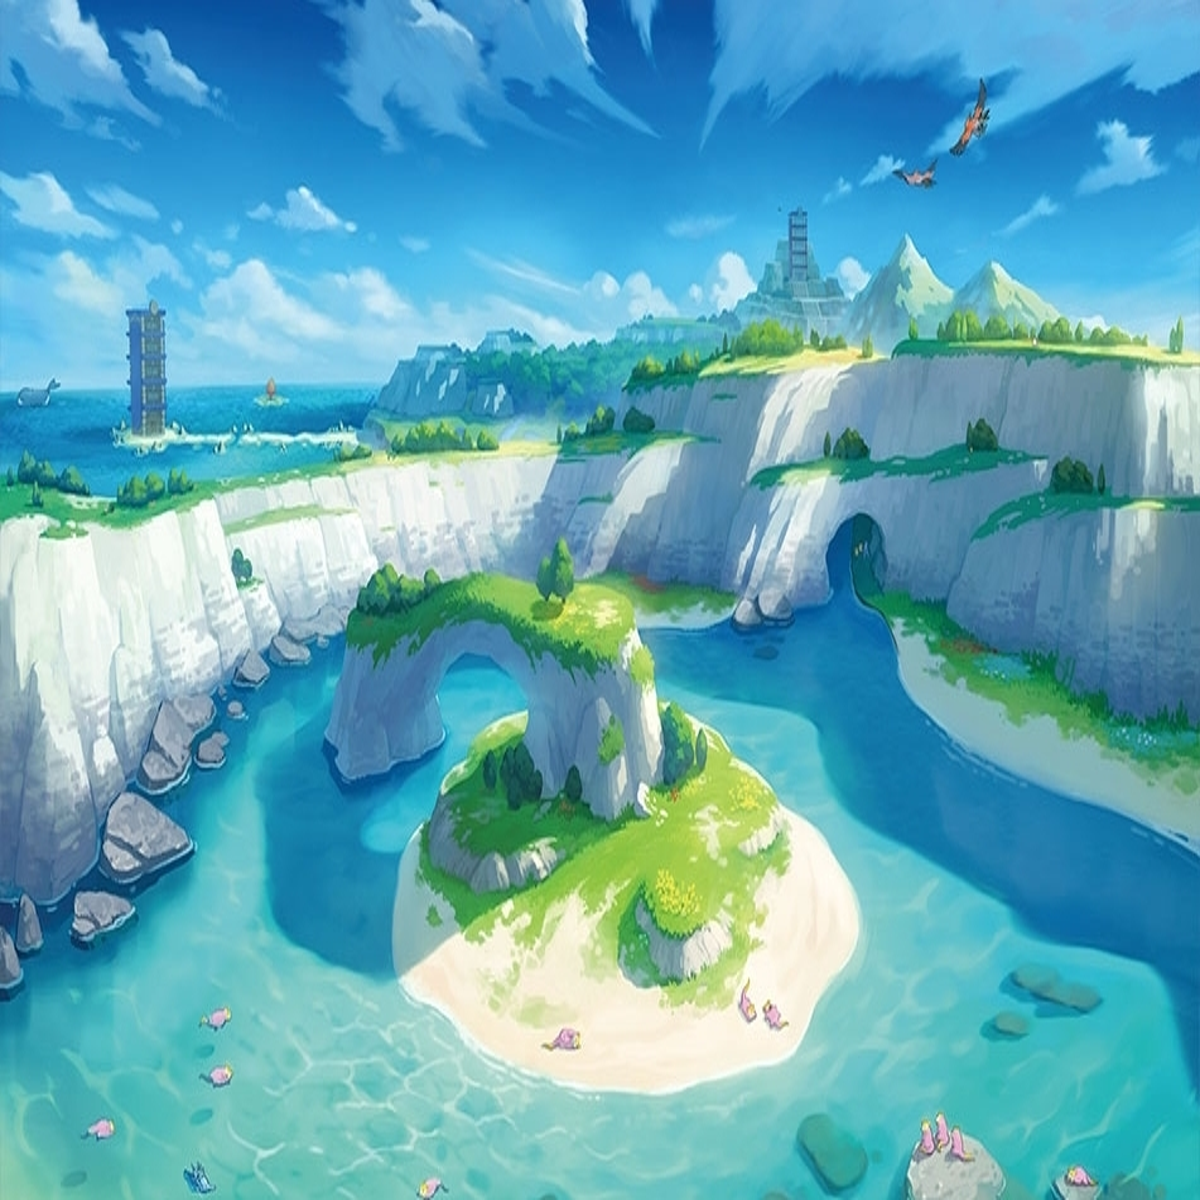 Pokémon Sword and Shield: Isle of Armor review - baby steps